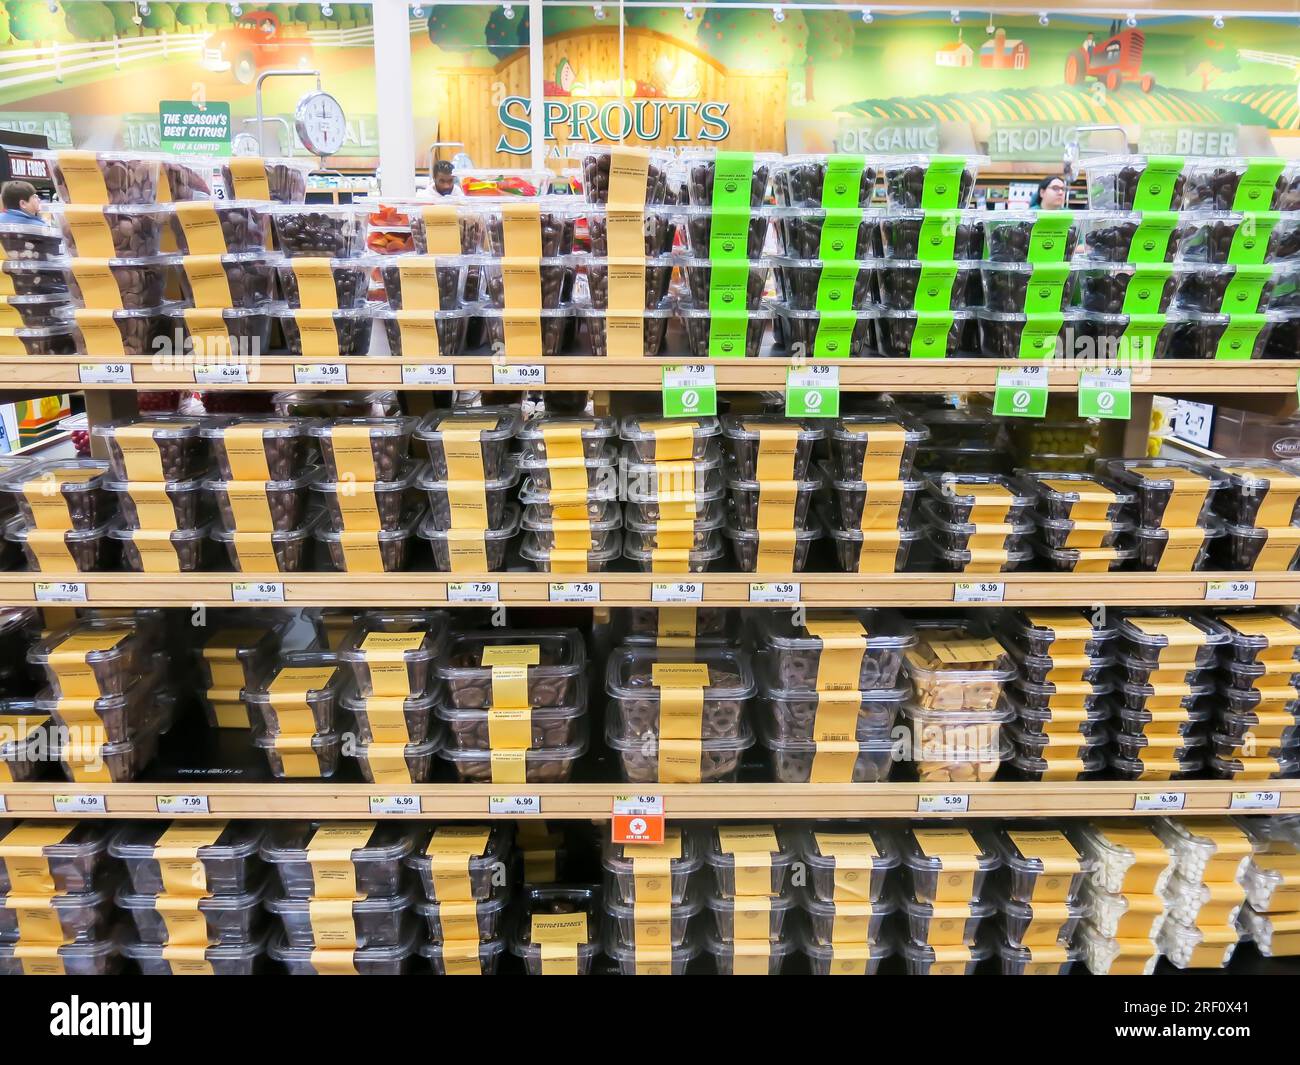 Pre-packaged Food Items on Display in Supermarket Stock Photo